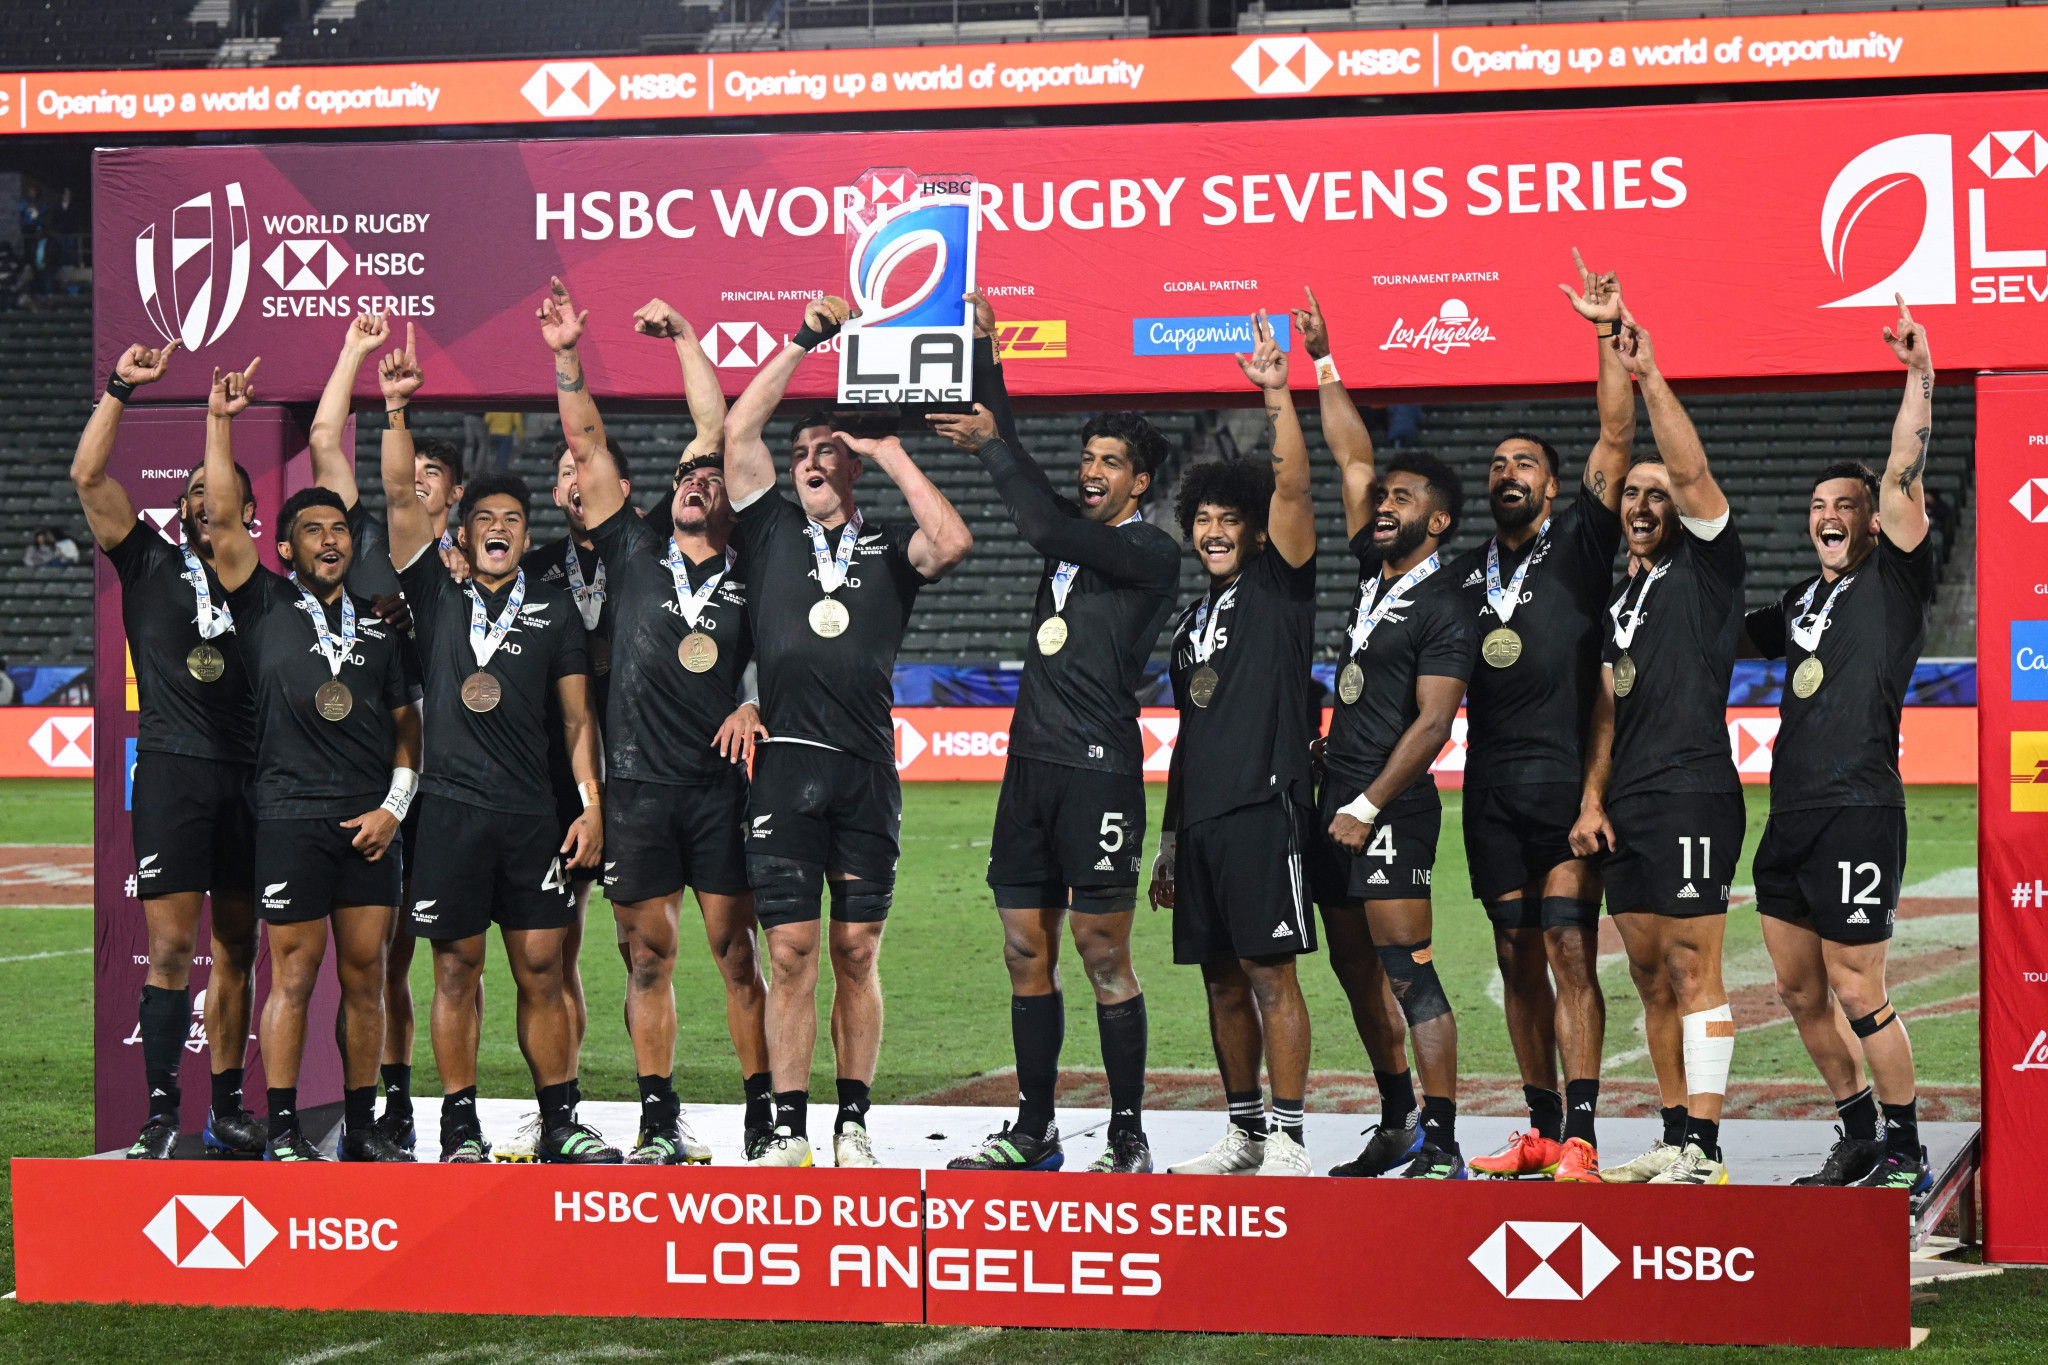 New Zealand triumph in Los Angeles to increase World Rugby Sevens Series lead